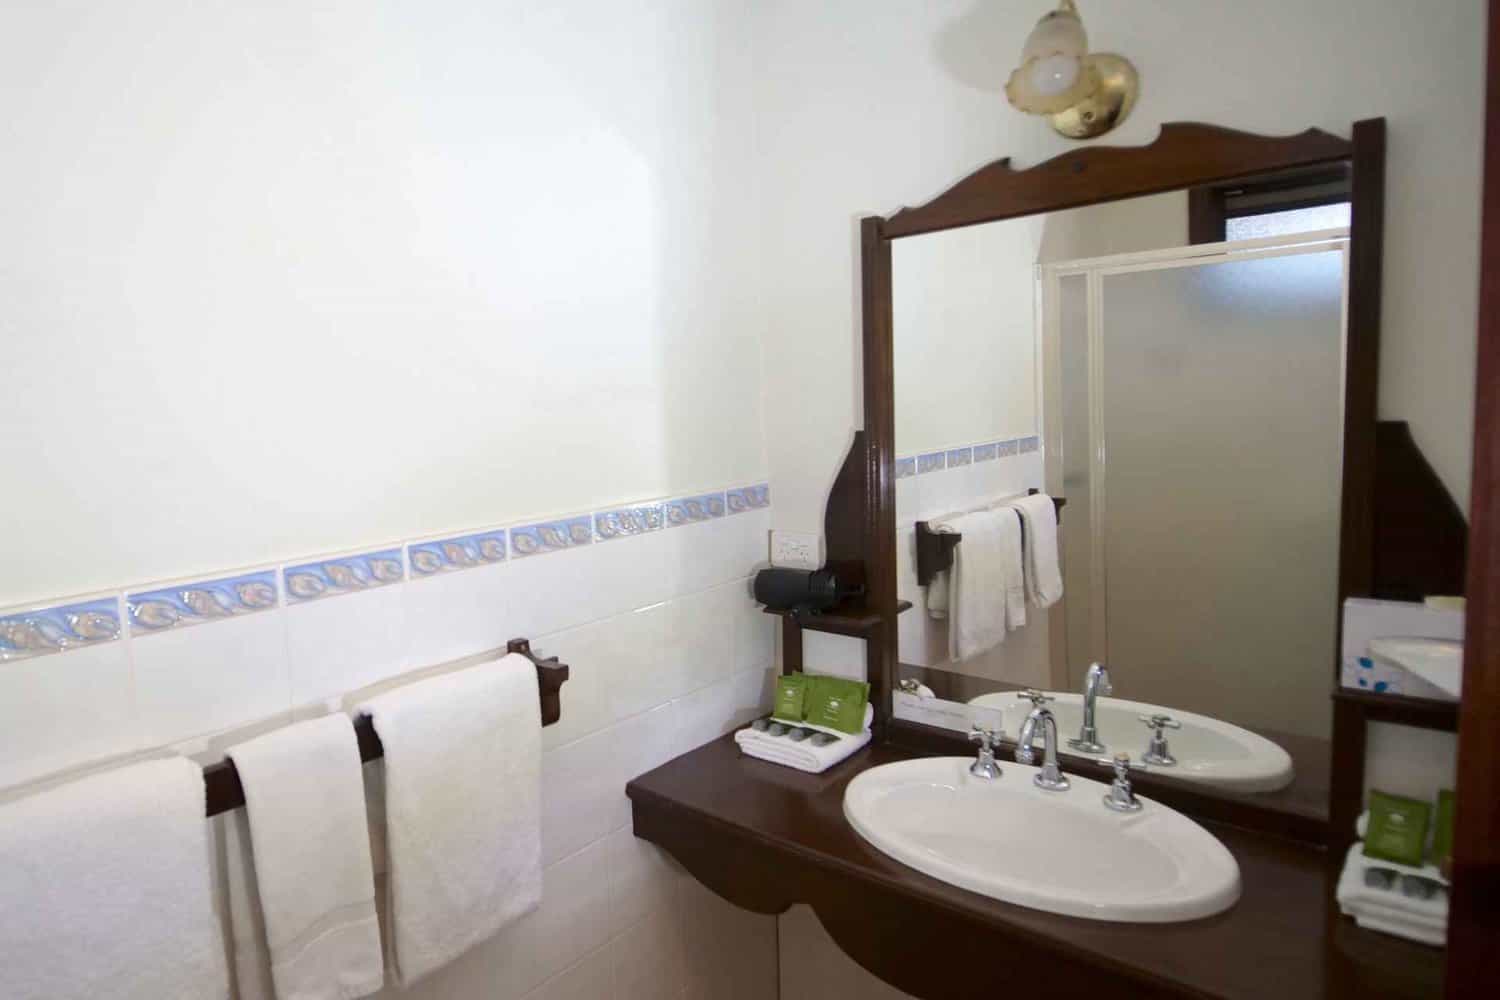 Well-appointed hotel bathroom featuring fresh towels on a rail, an array of bathroom amenities for guests' convenience, and a large mirror over the sink, reflecting the comfort and hospitality provided during an extended stay